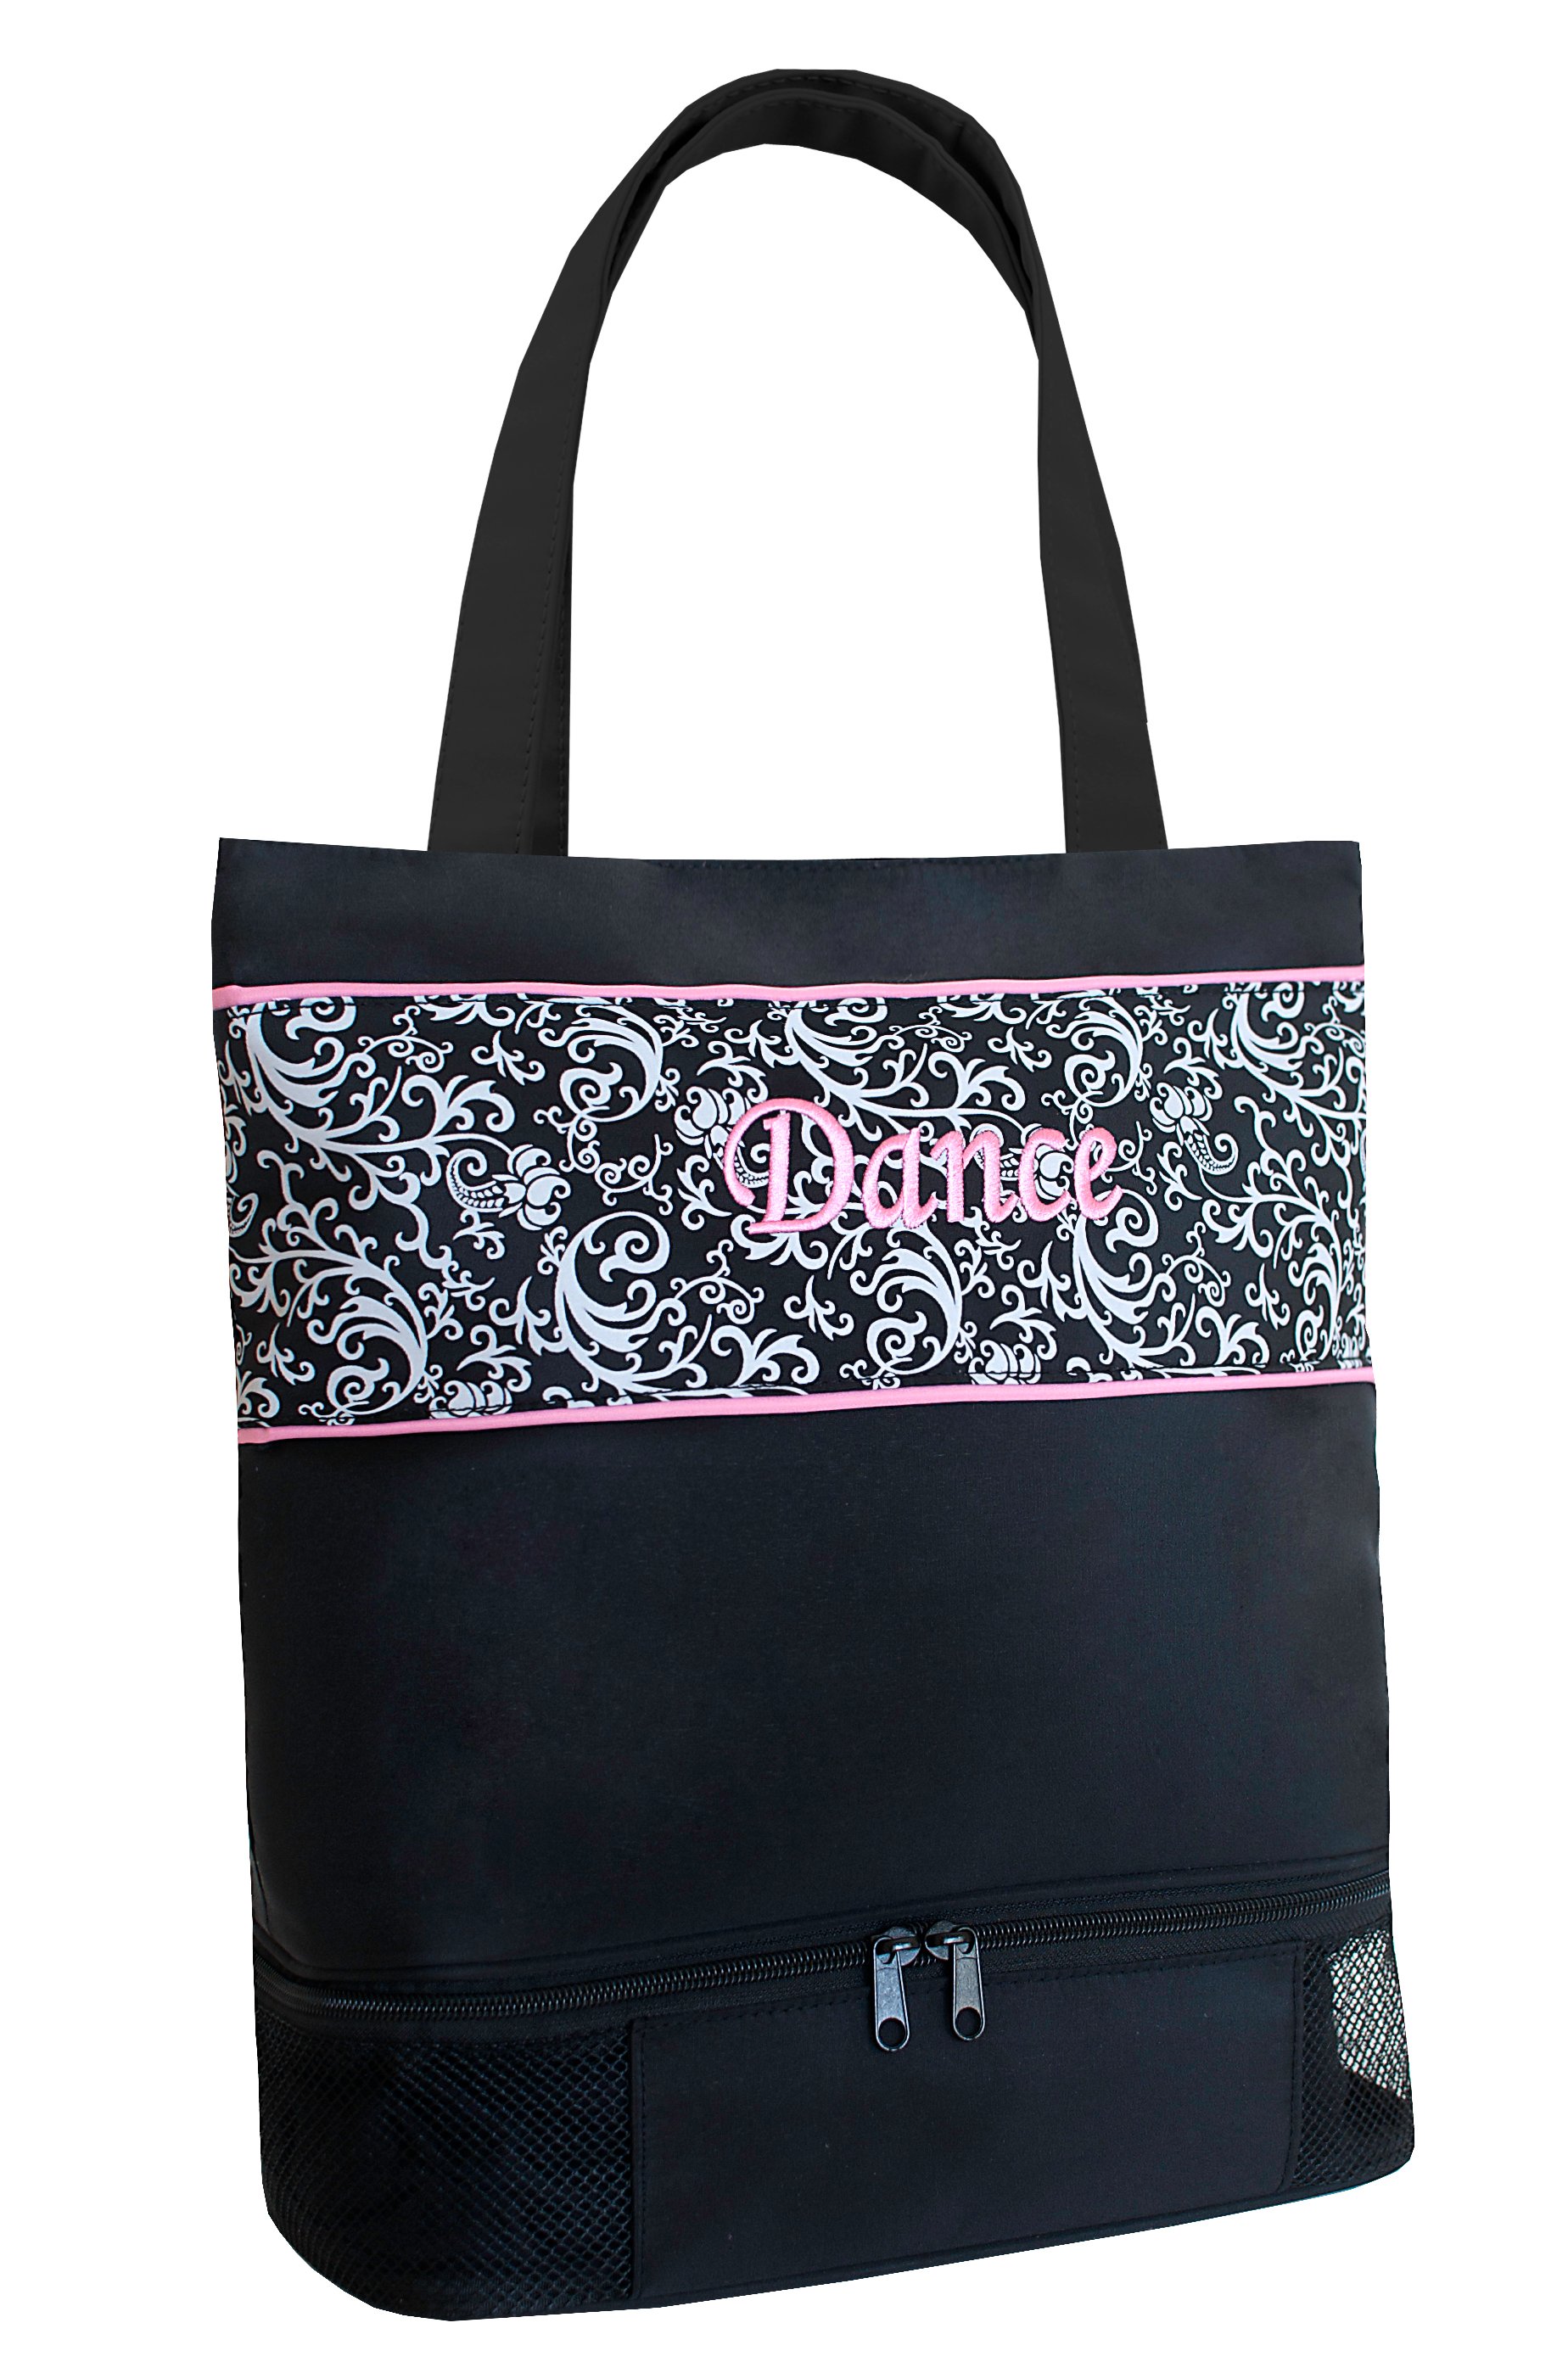 Damask Tote Bag With Shoe Compartment - Medium